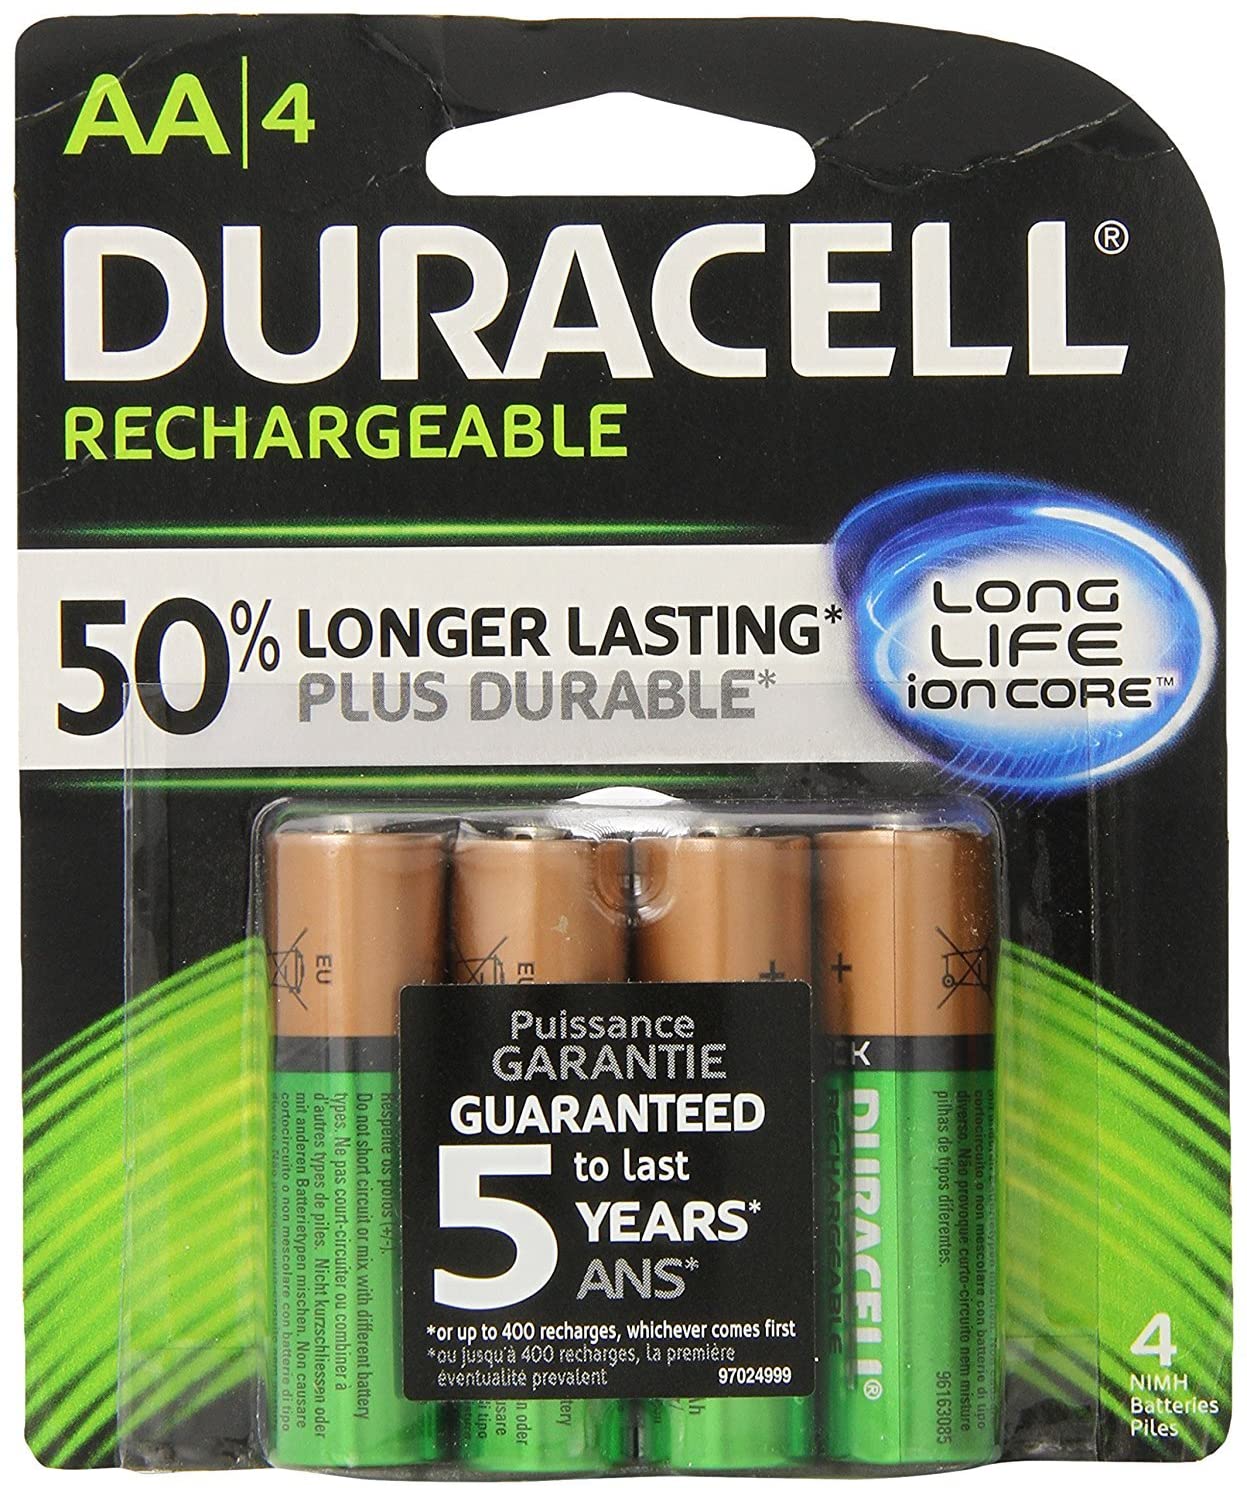 DURACELL AA RECHARGEABLE BATTERY RECHARGE BATTERY AA4 NIMH